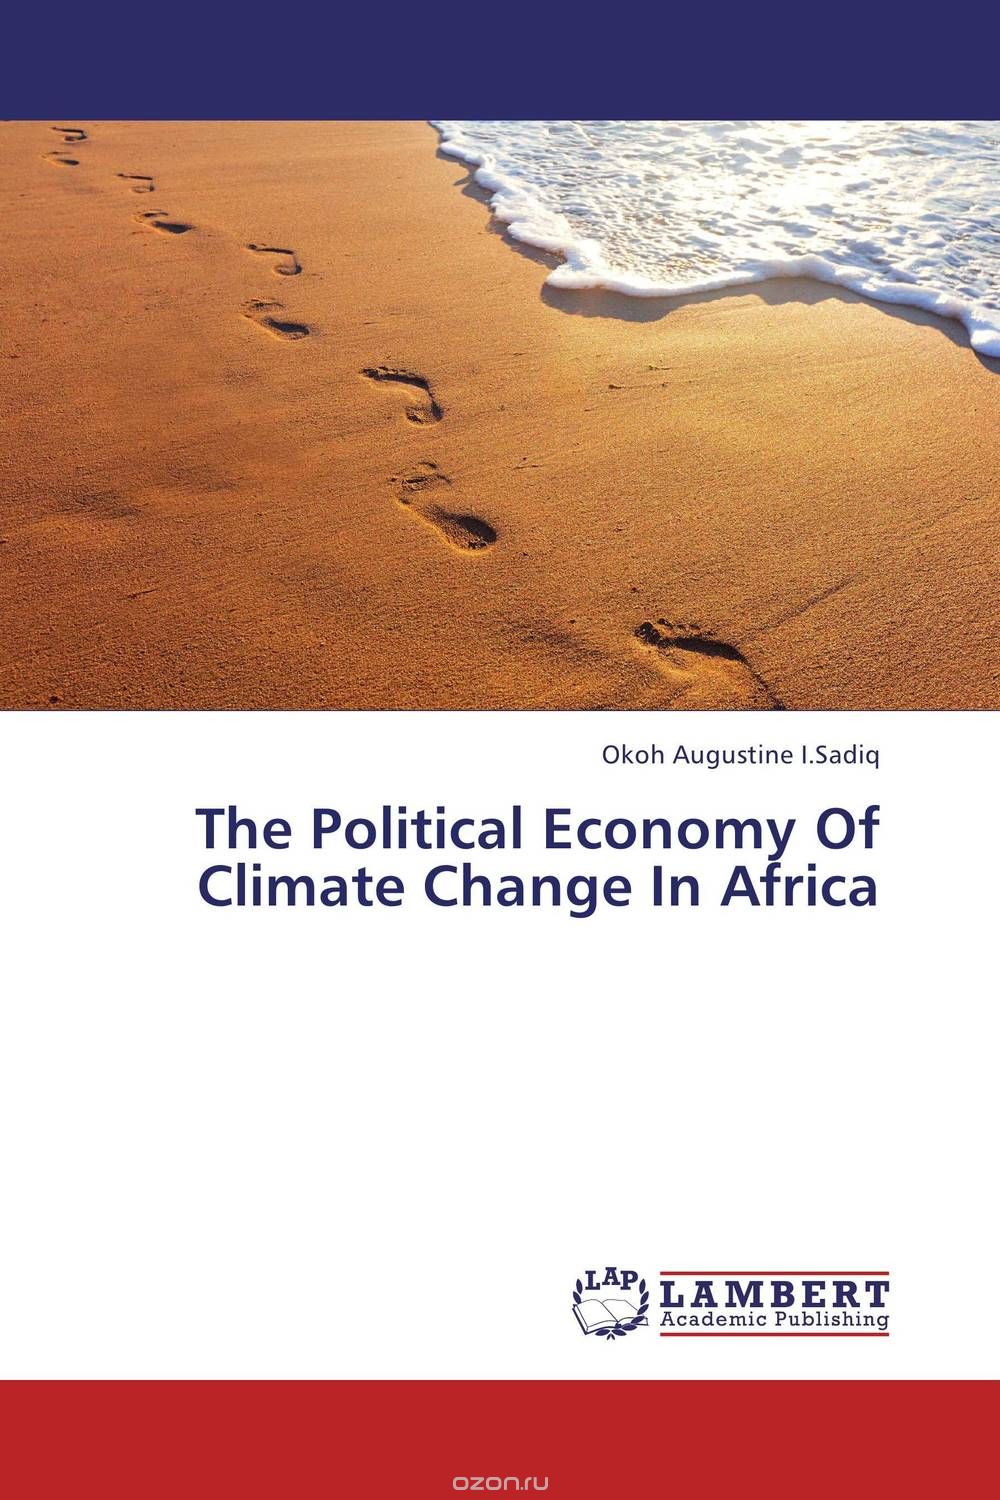 Скачать книгу "The Political Economy Of Climate Change In Africa"